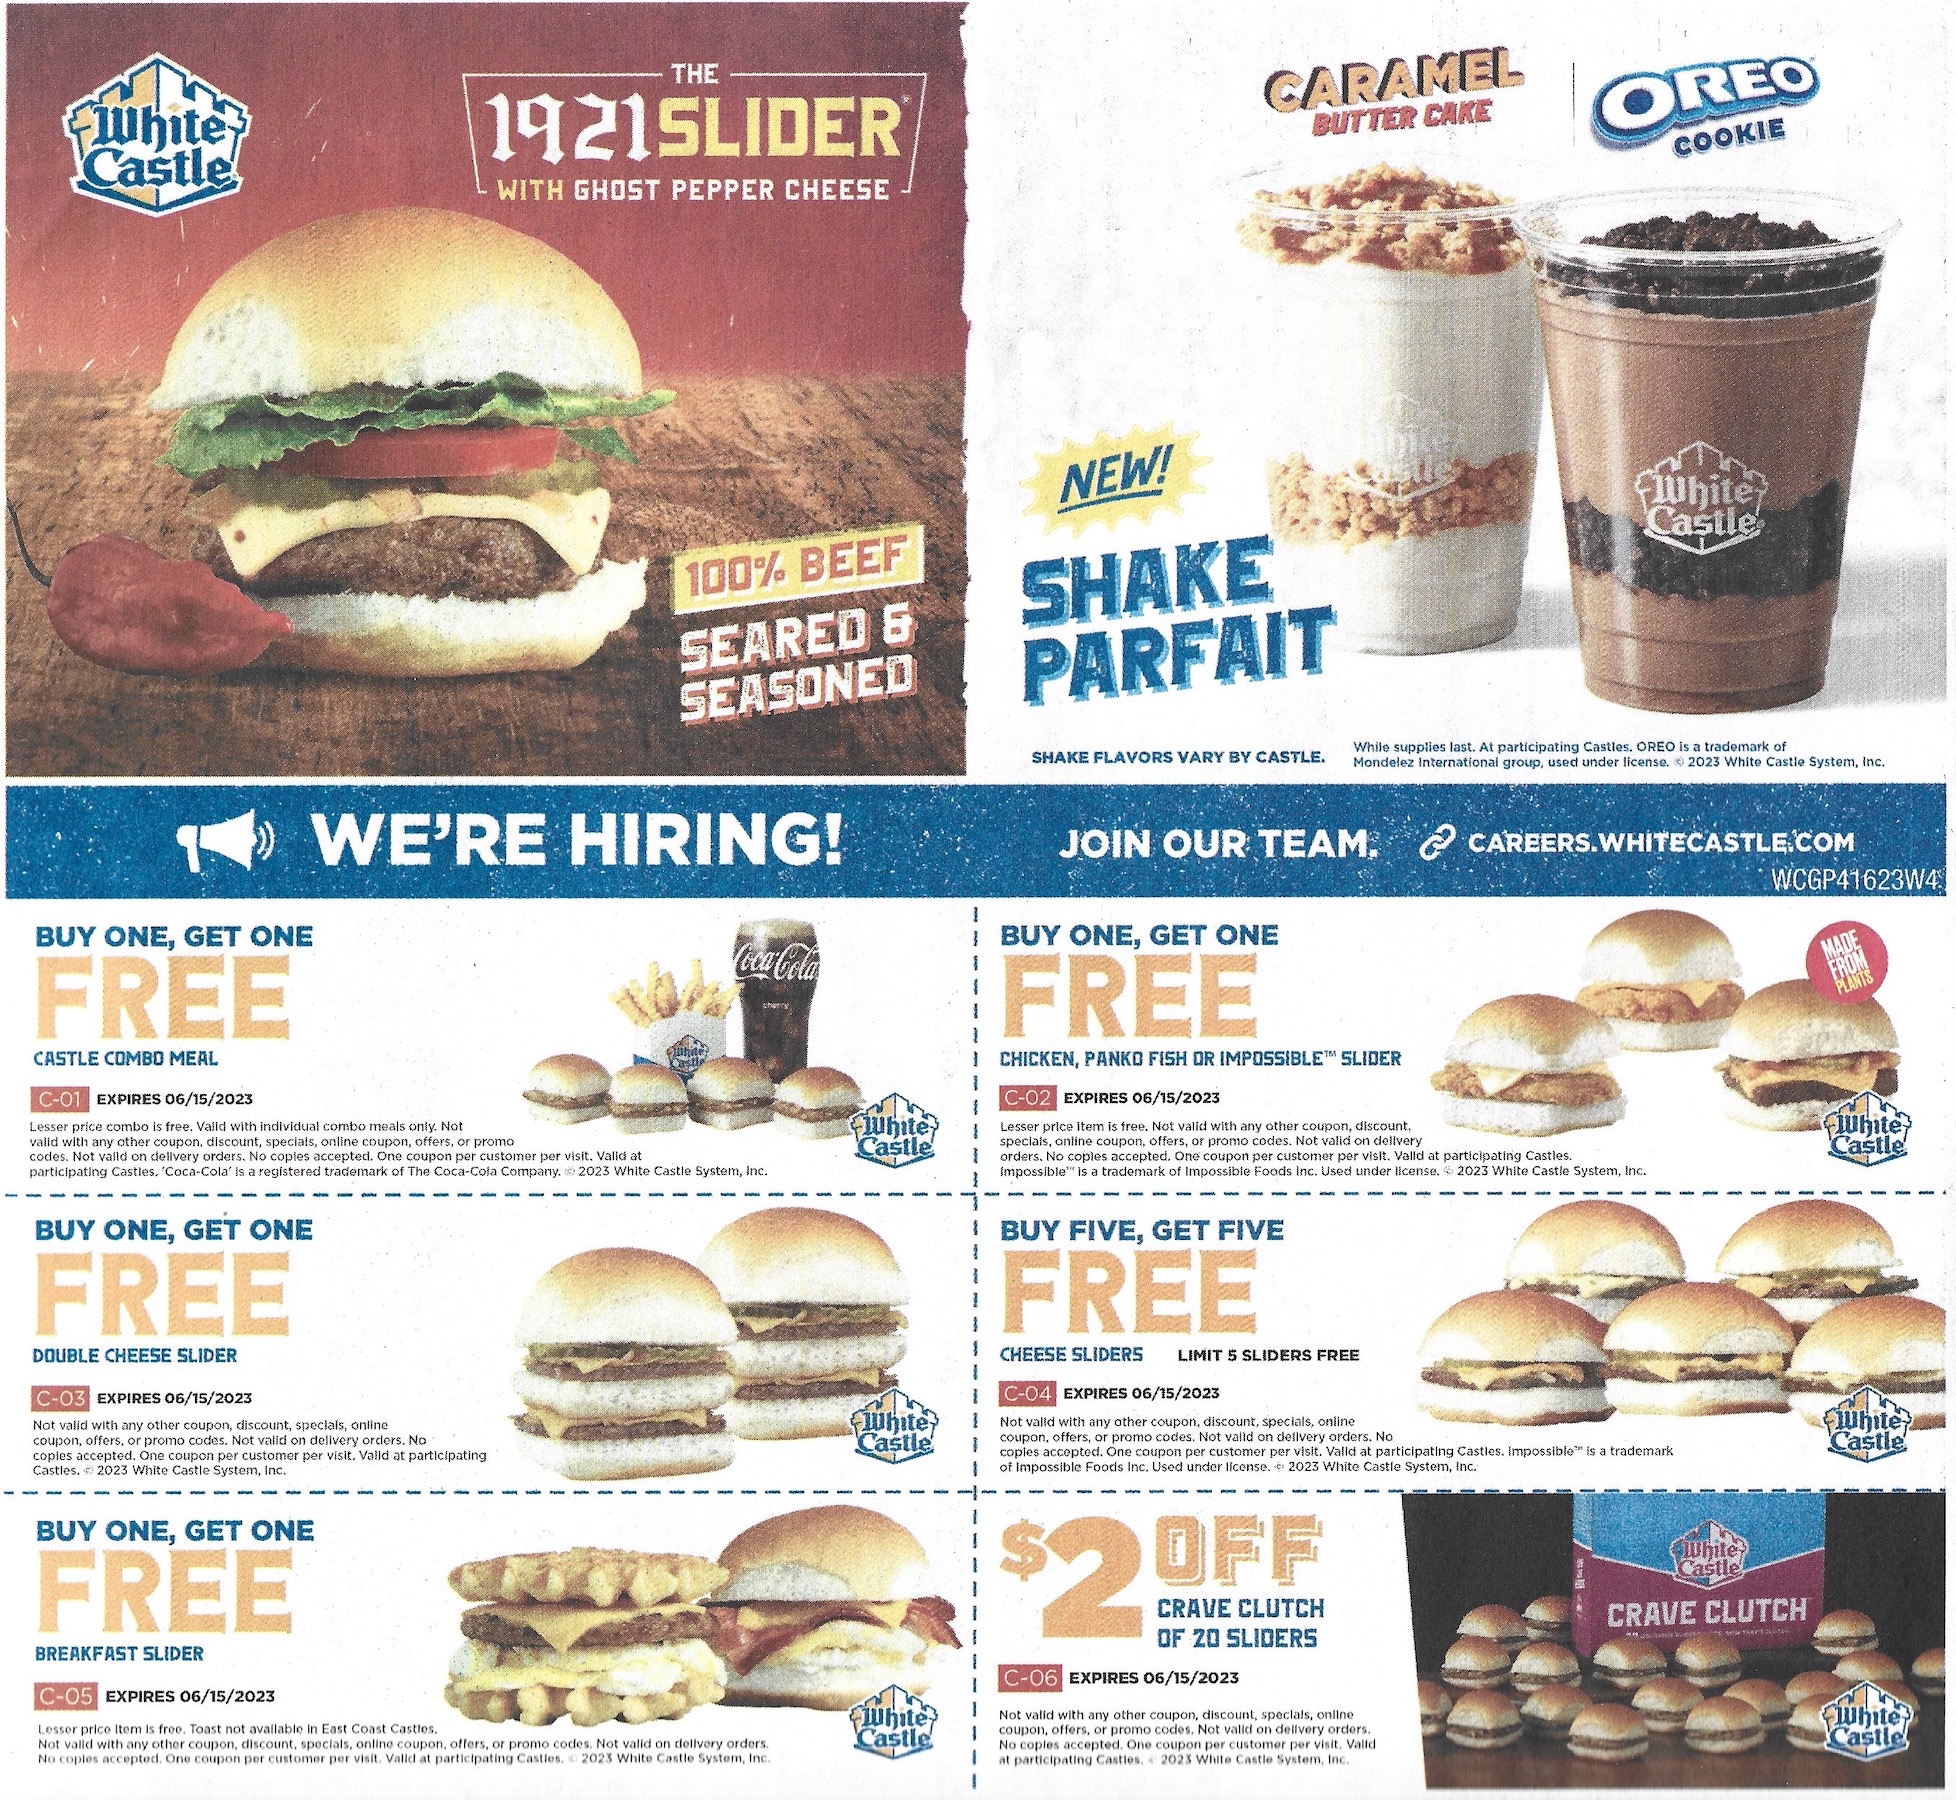 White Castle Coupons - Expires 06/15/2023